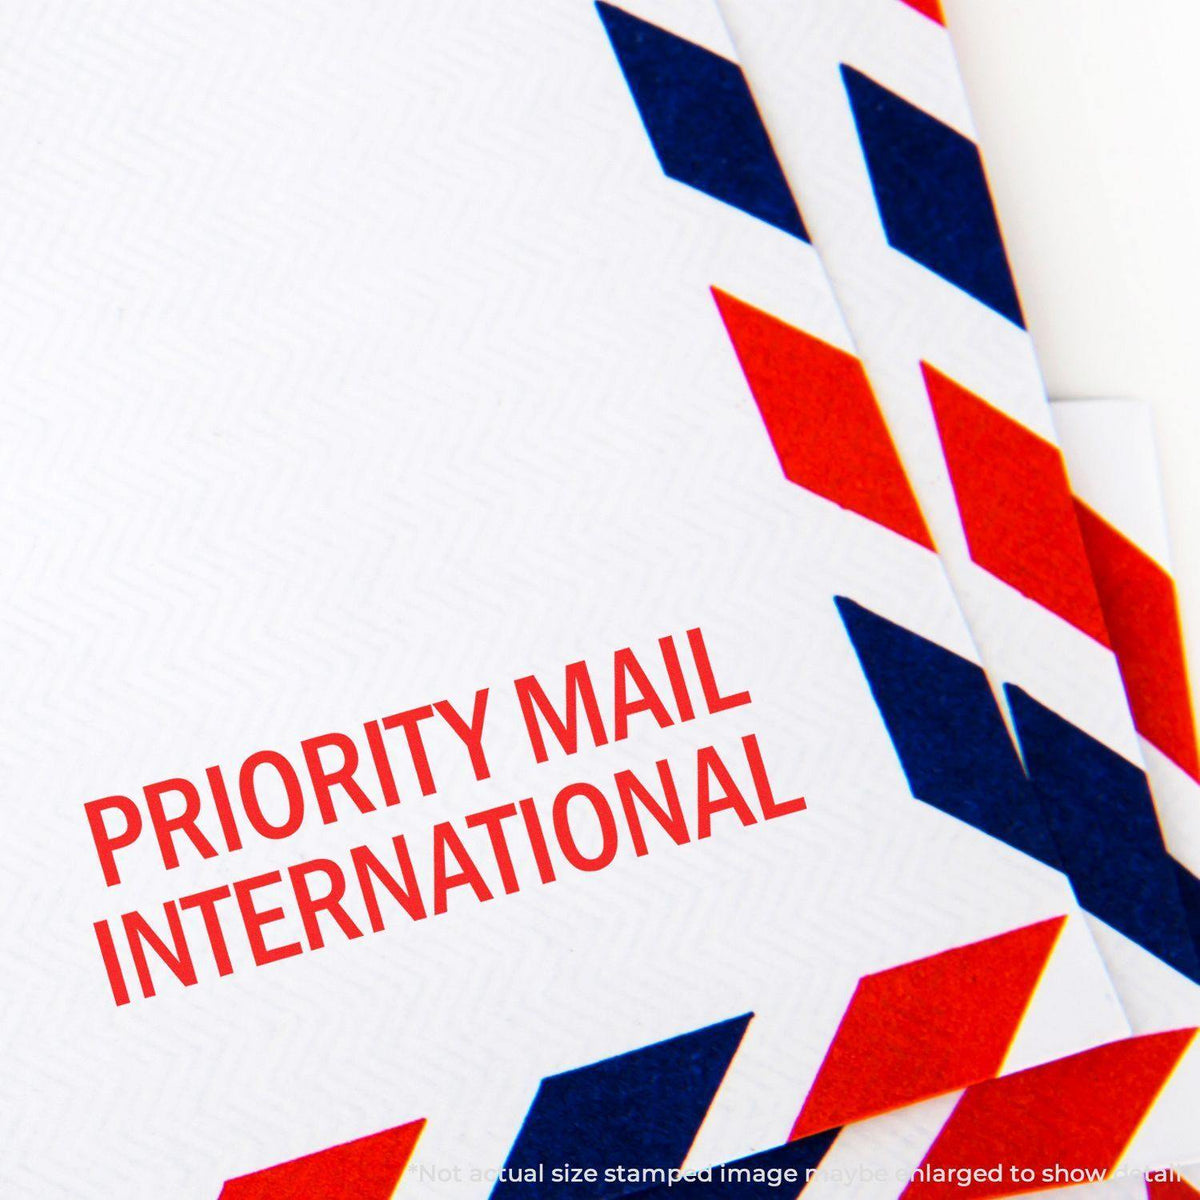 Large Self-Inking Priority Mail International Stamp - Engineer Seal Stamps - Brand_Trodat, Impression Size_Large, Stamp Type_Self-Inking Stamp, Type of Use_Postal &amp; Mailing